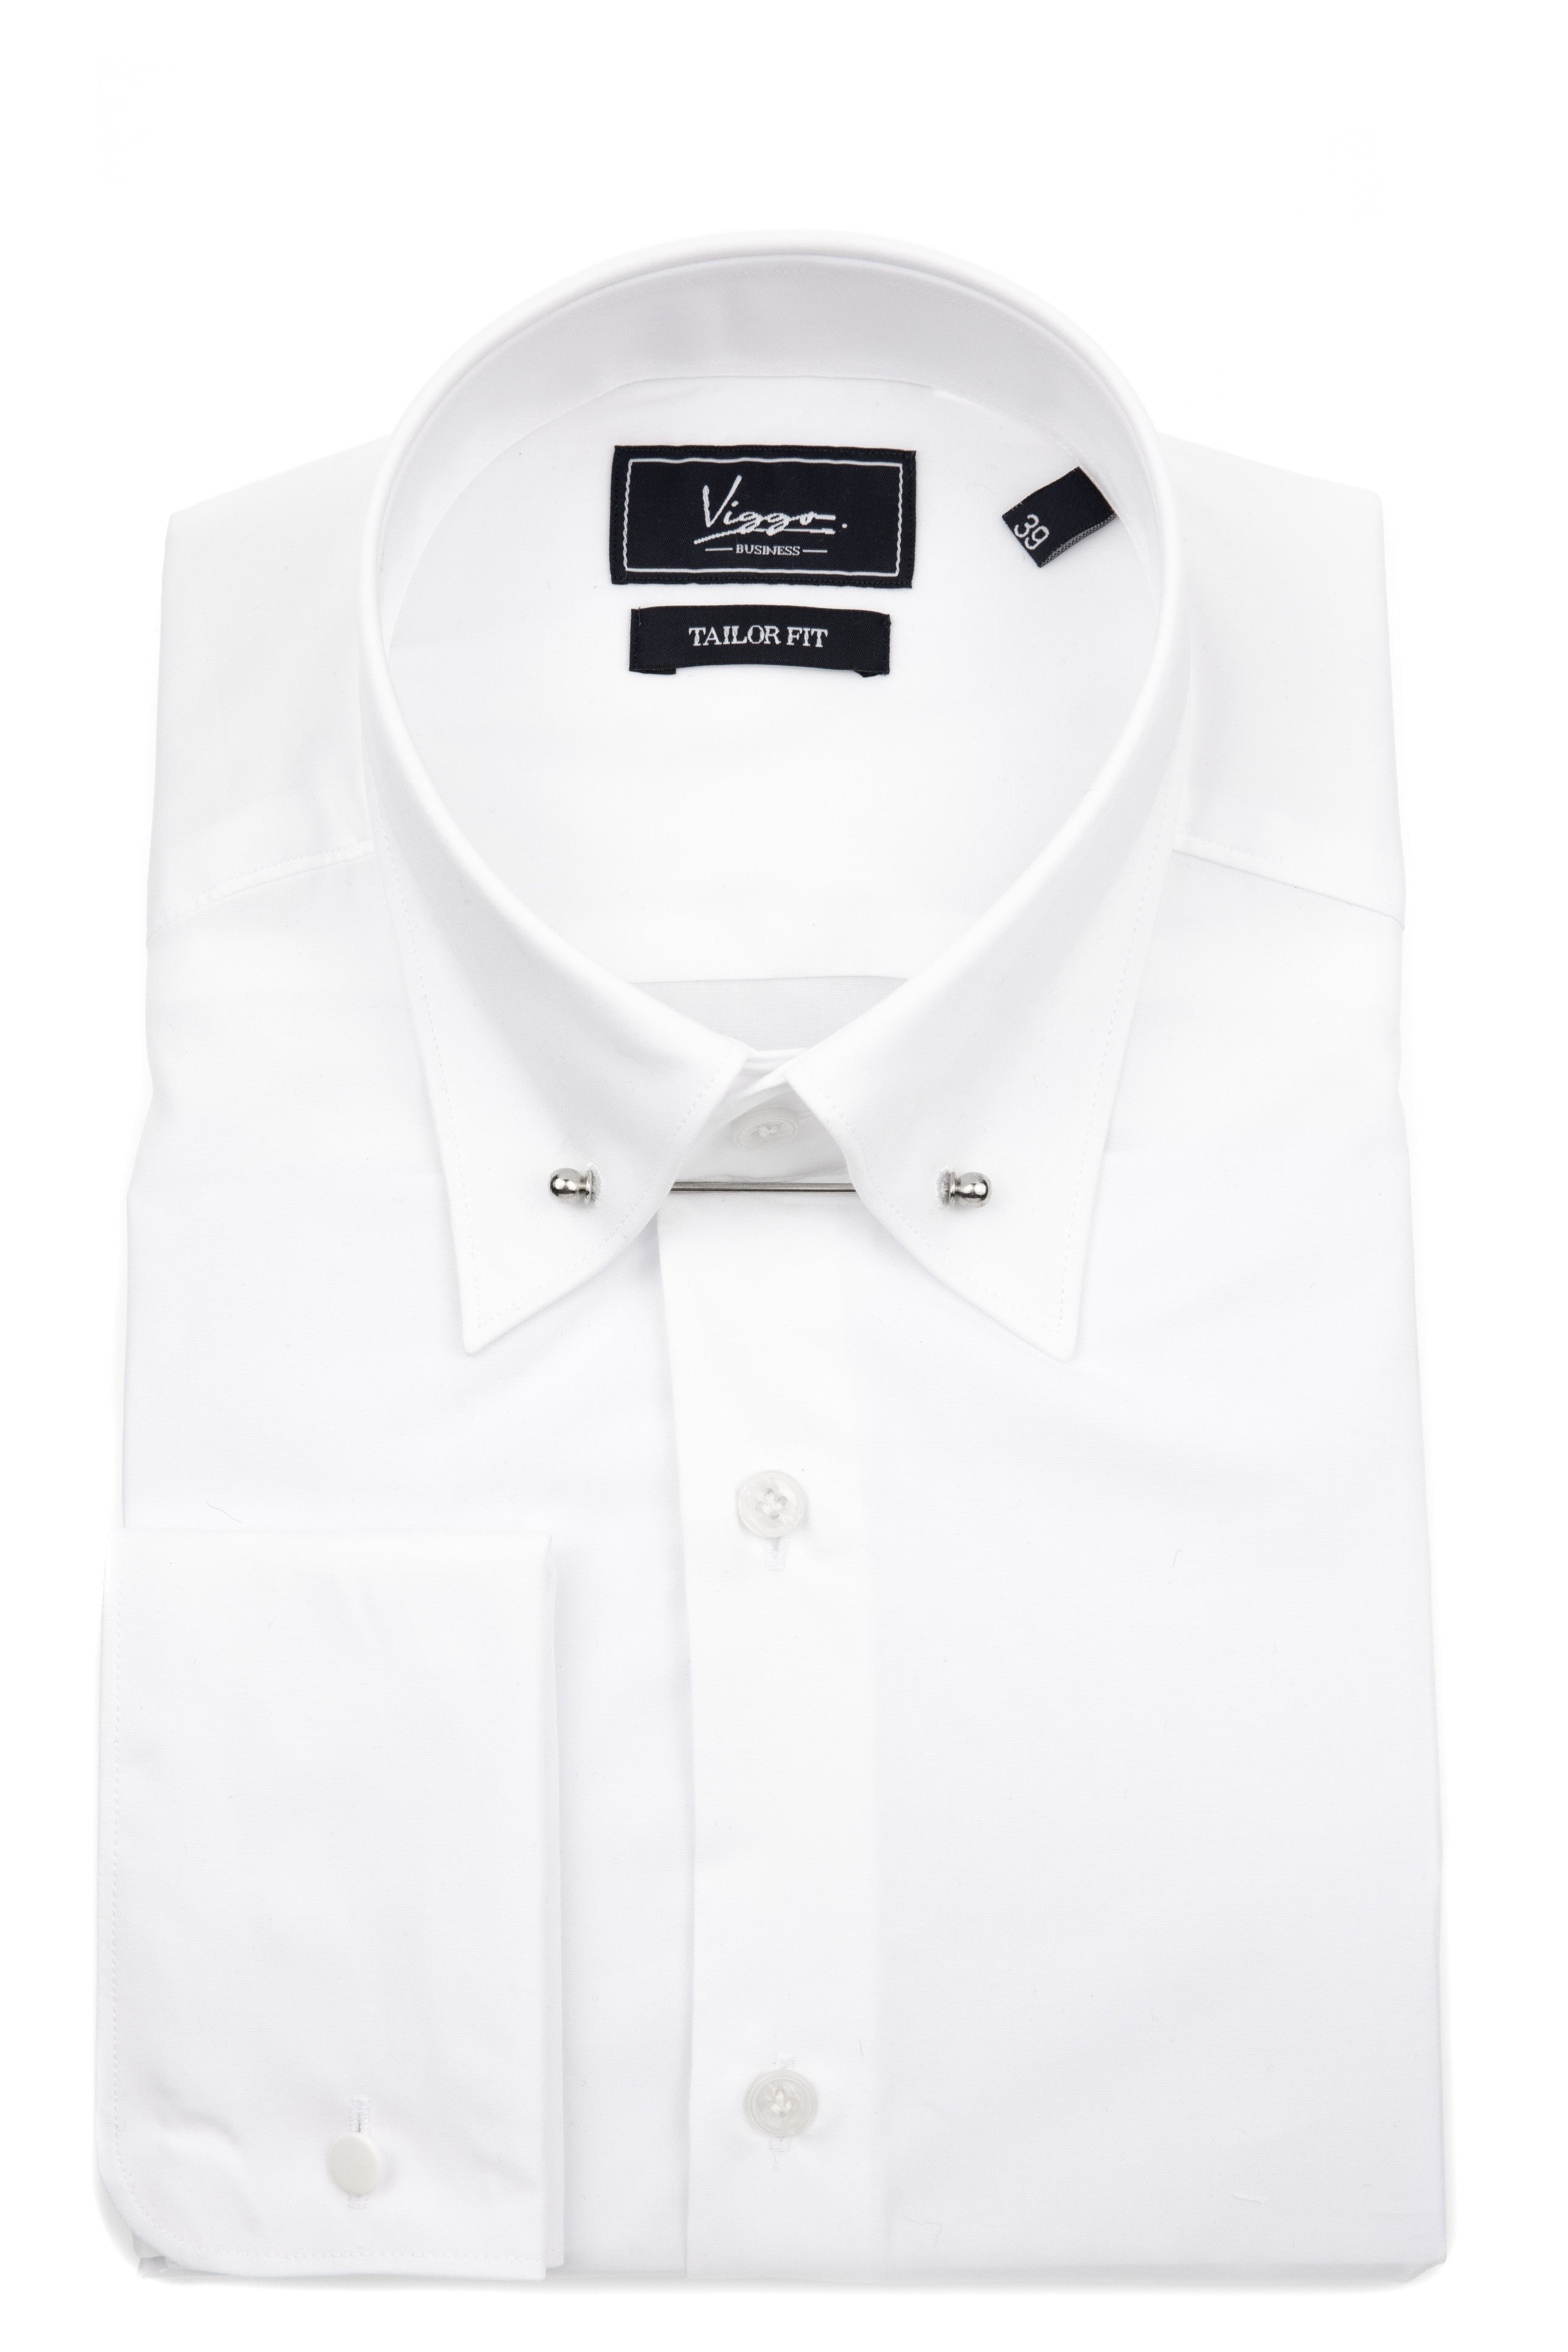 White business shirt with pin, button cuff